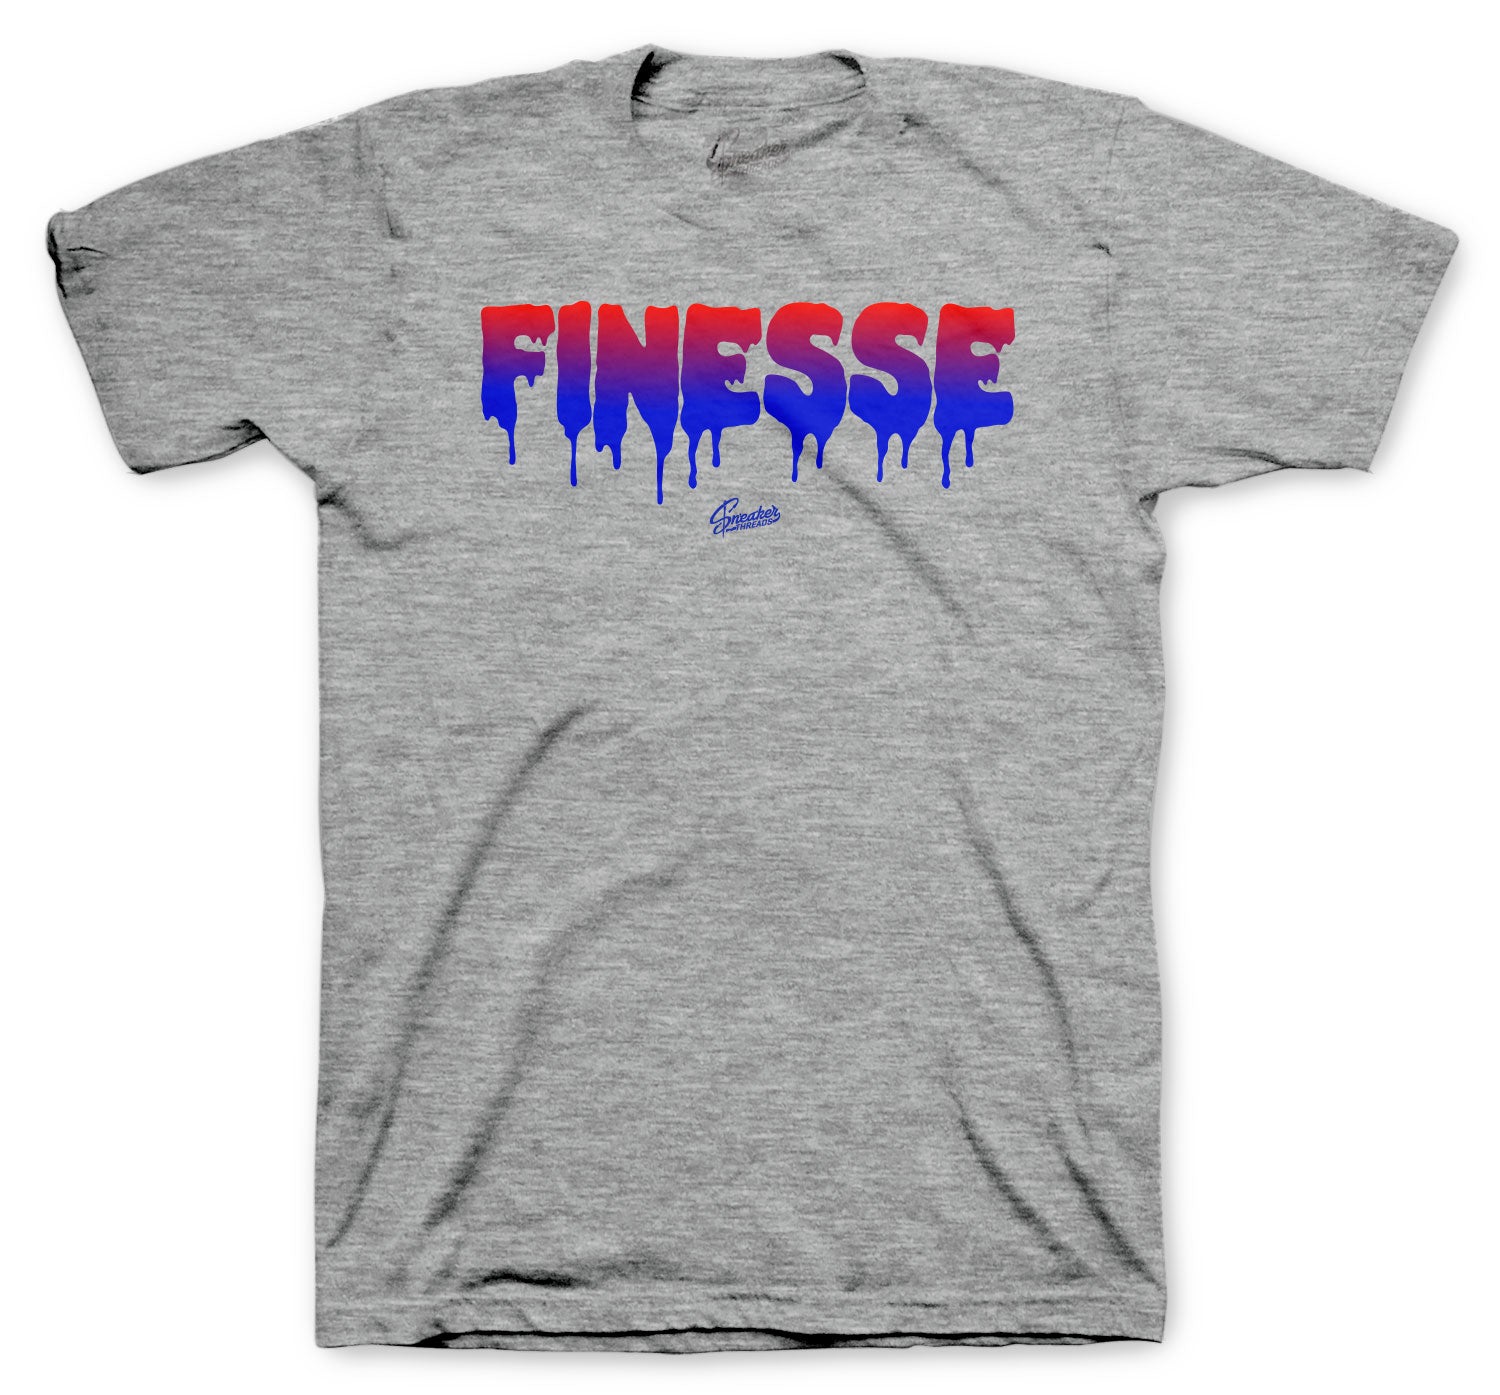 All Star 2020 Tune Squad Shirt  - Finesse - Heather Grey